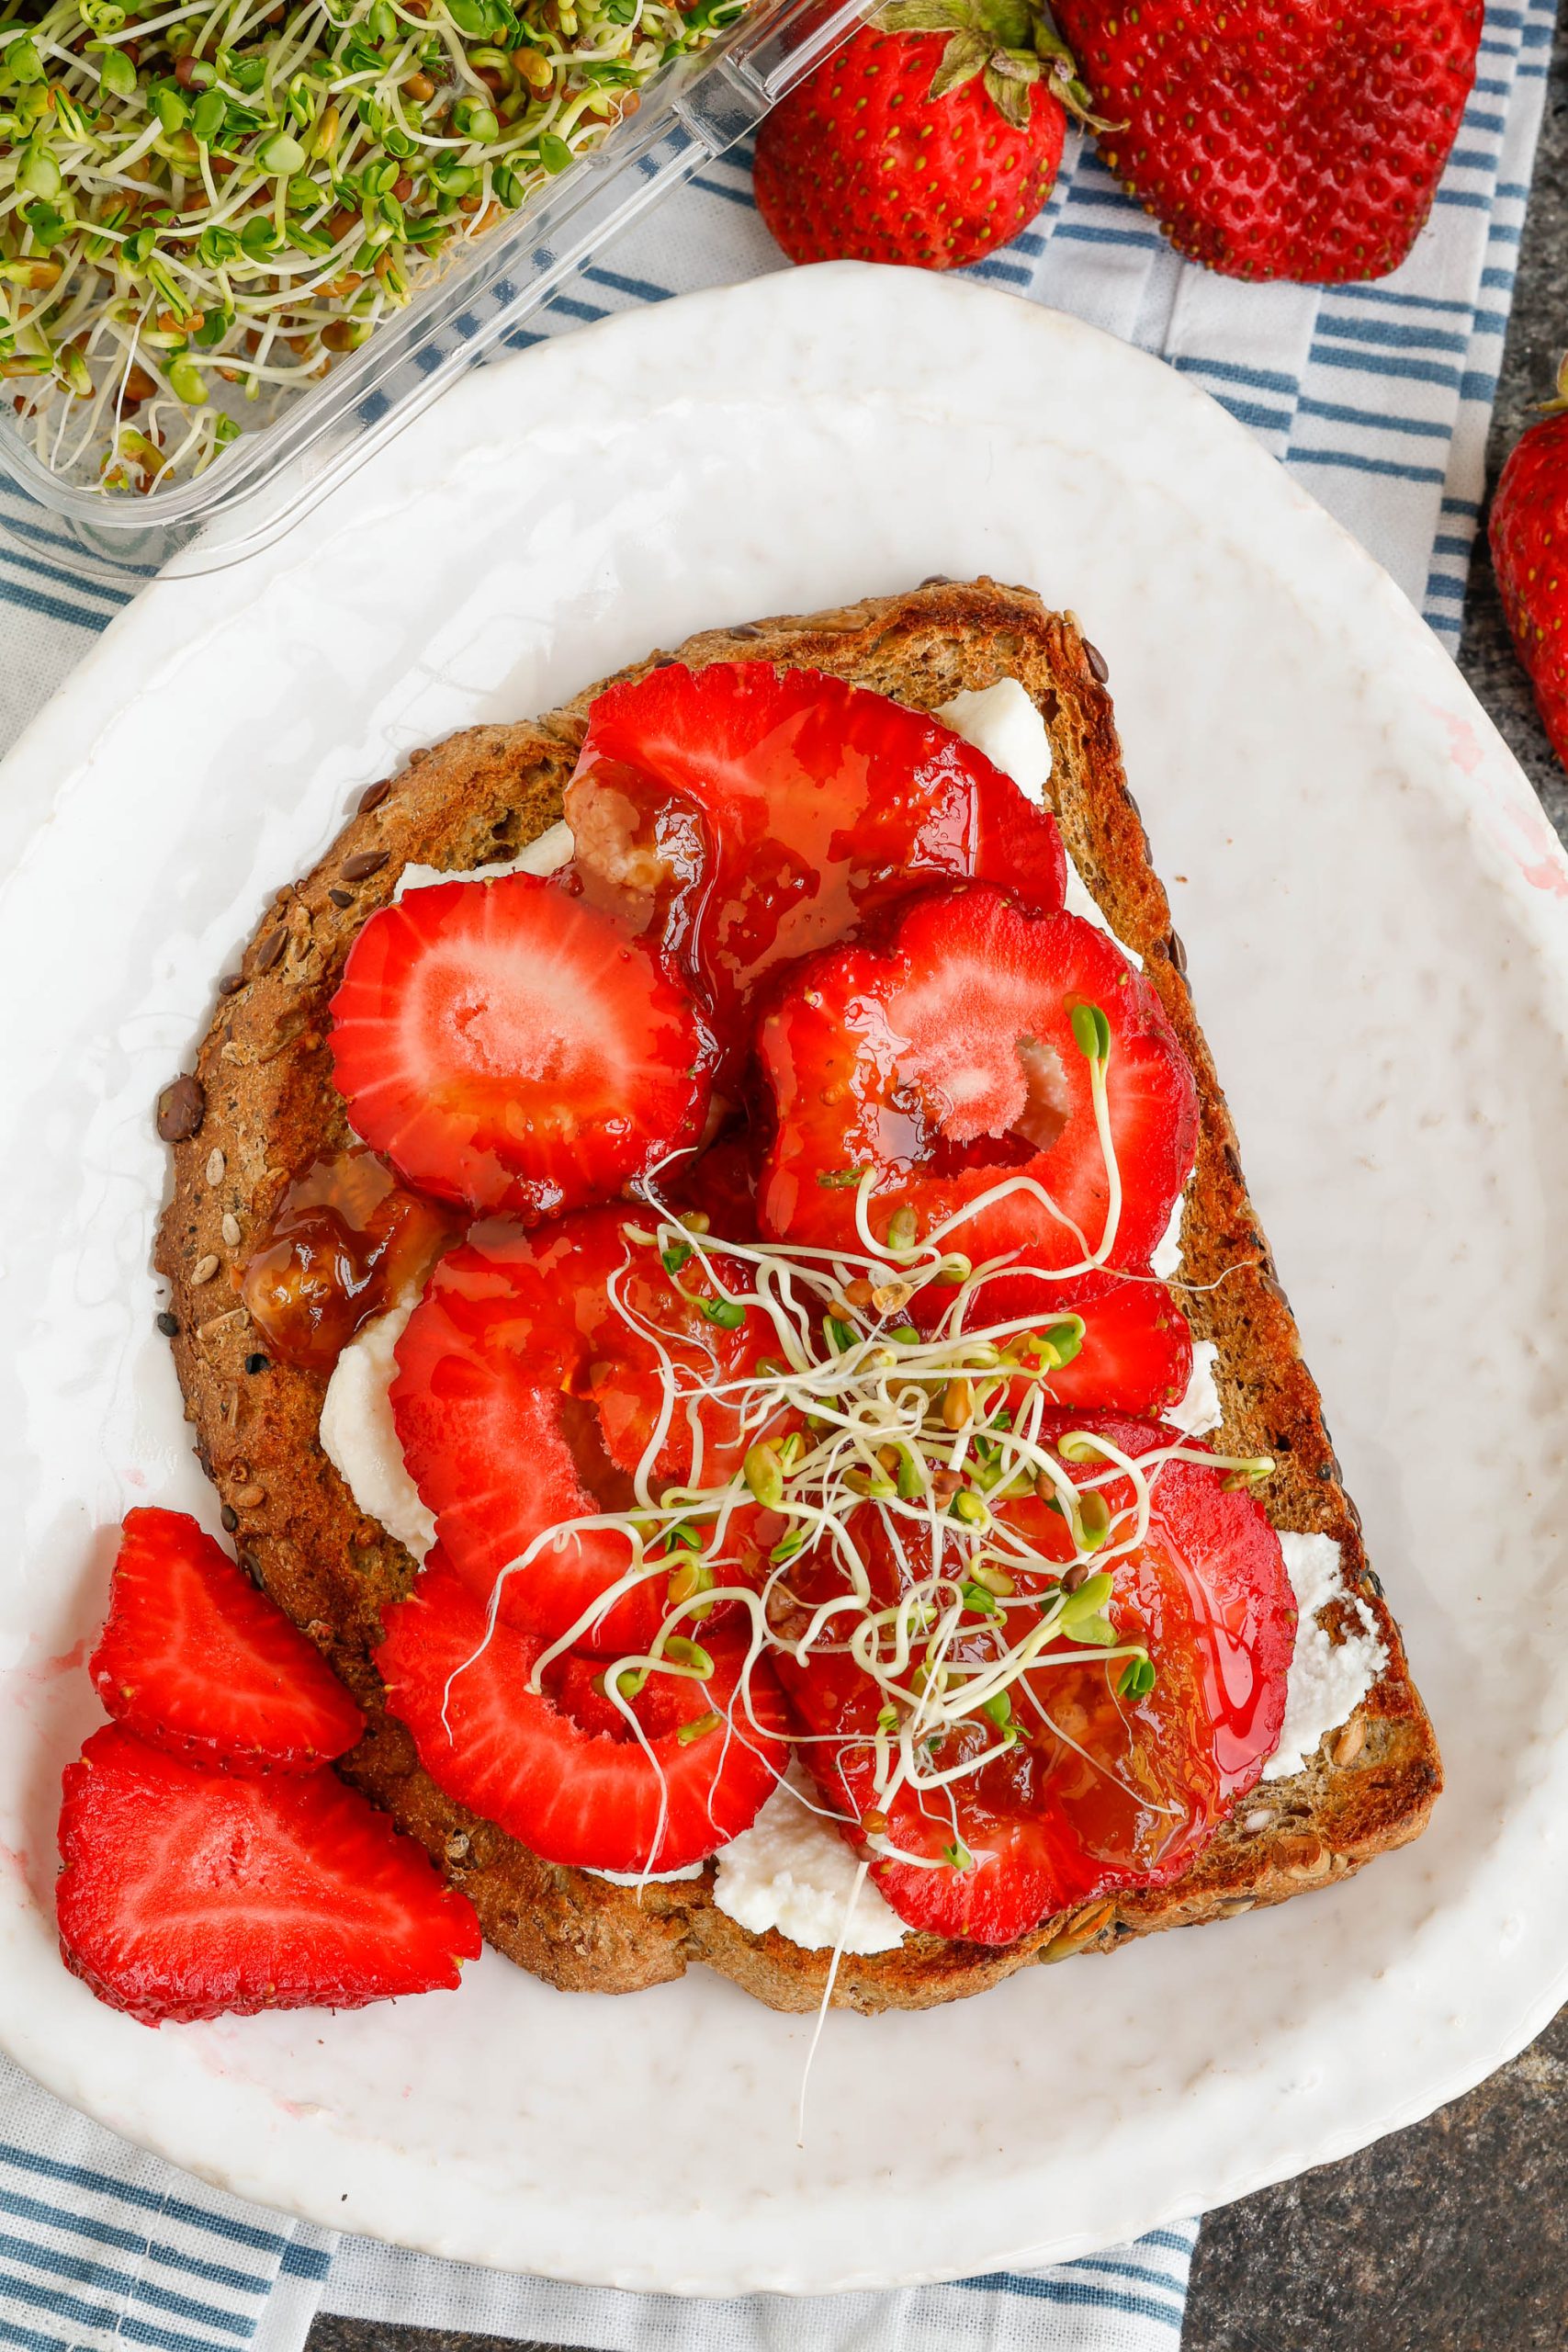 Strawberries, jam, and sprouts on toasted bread.